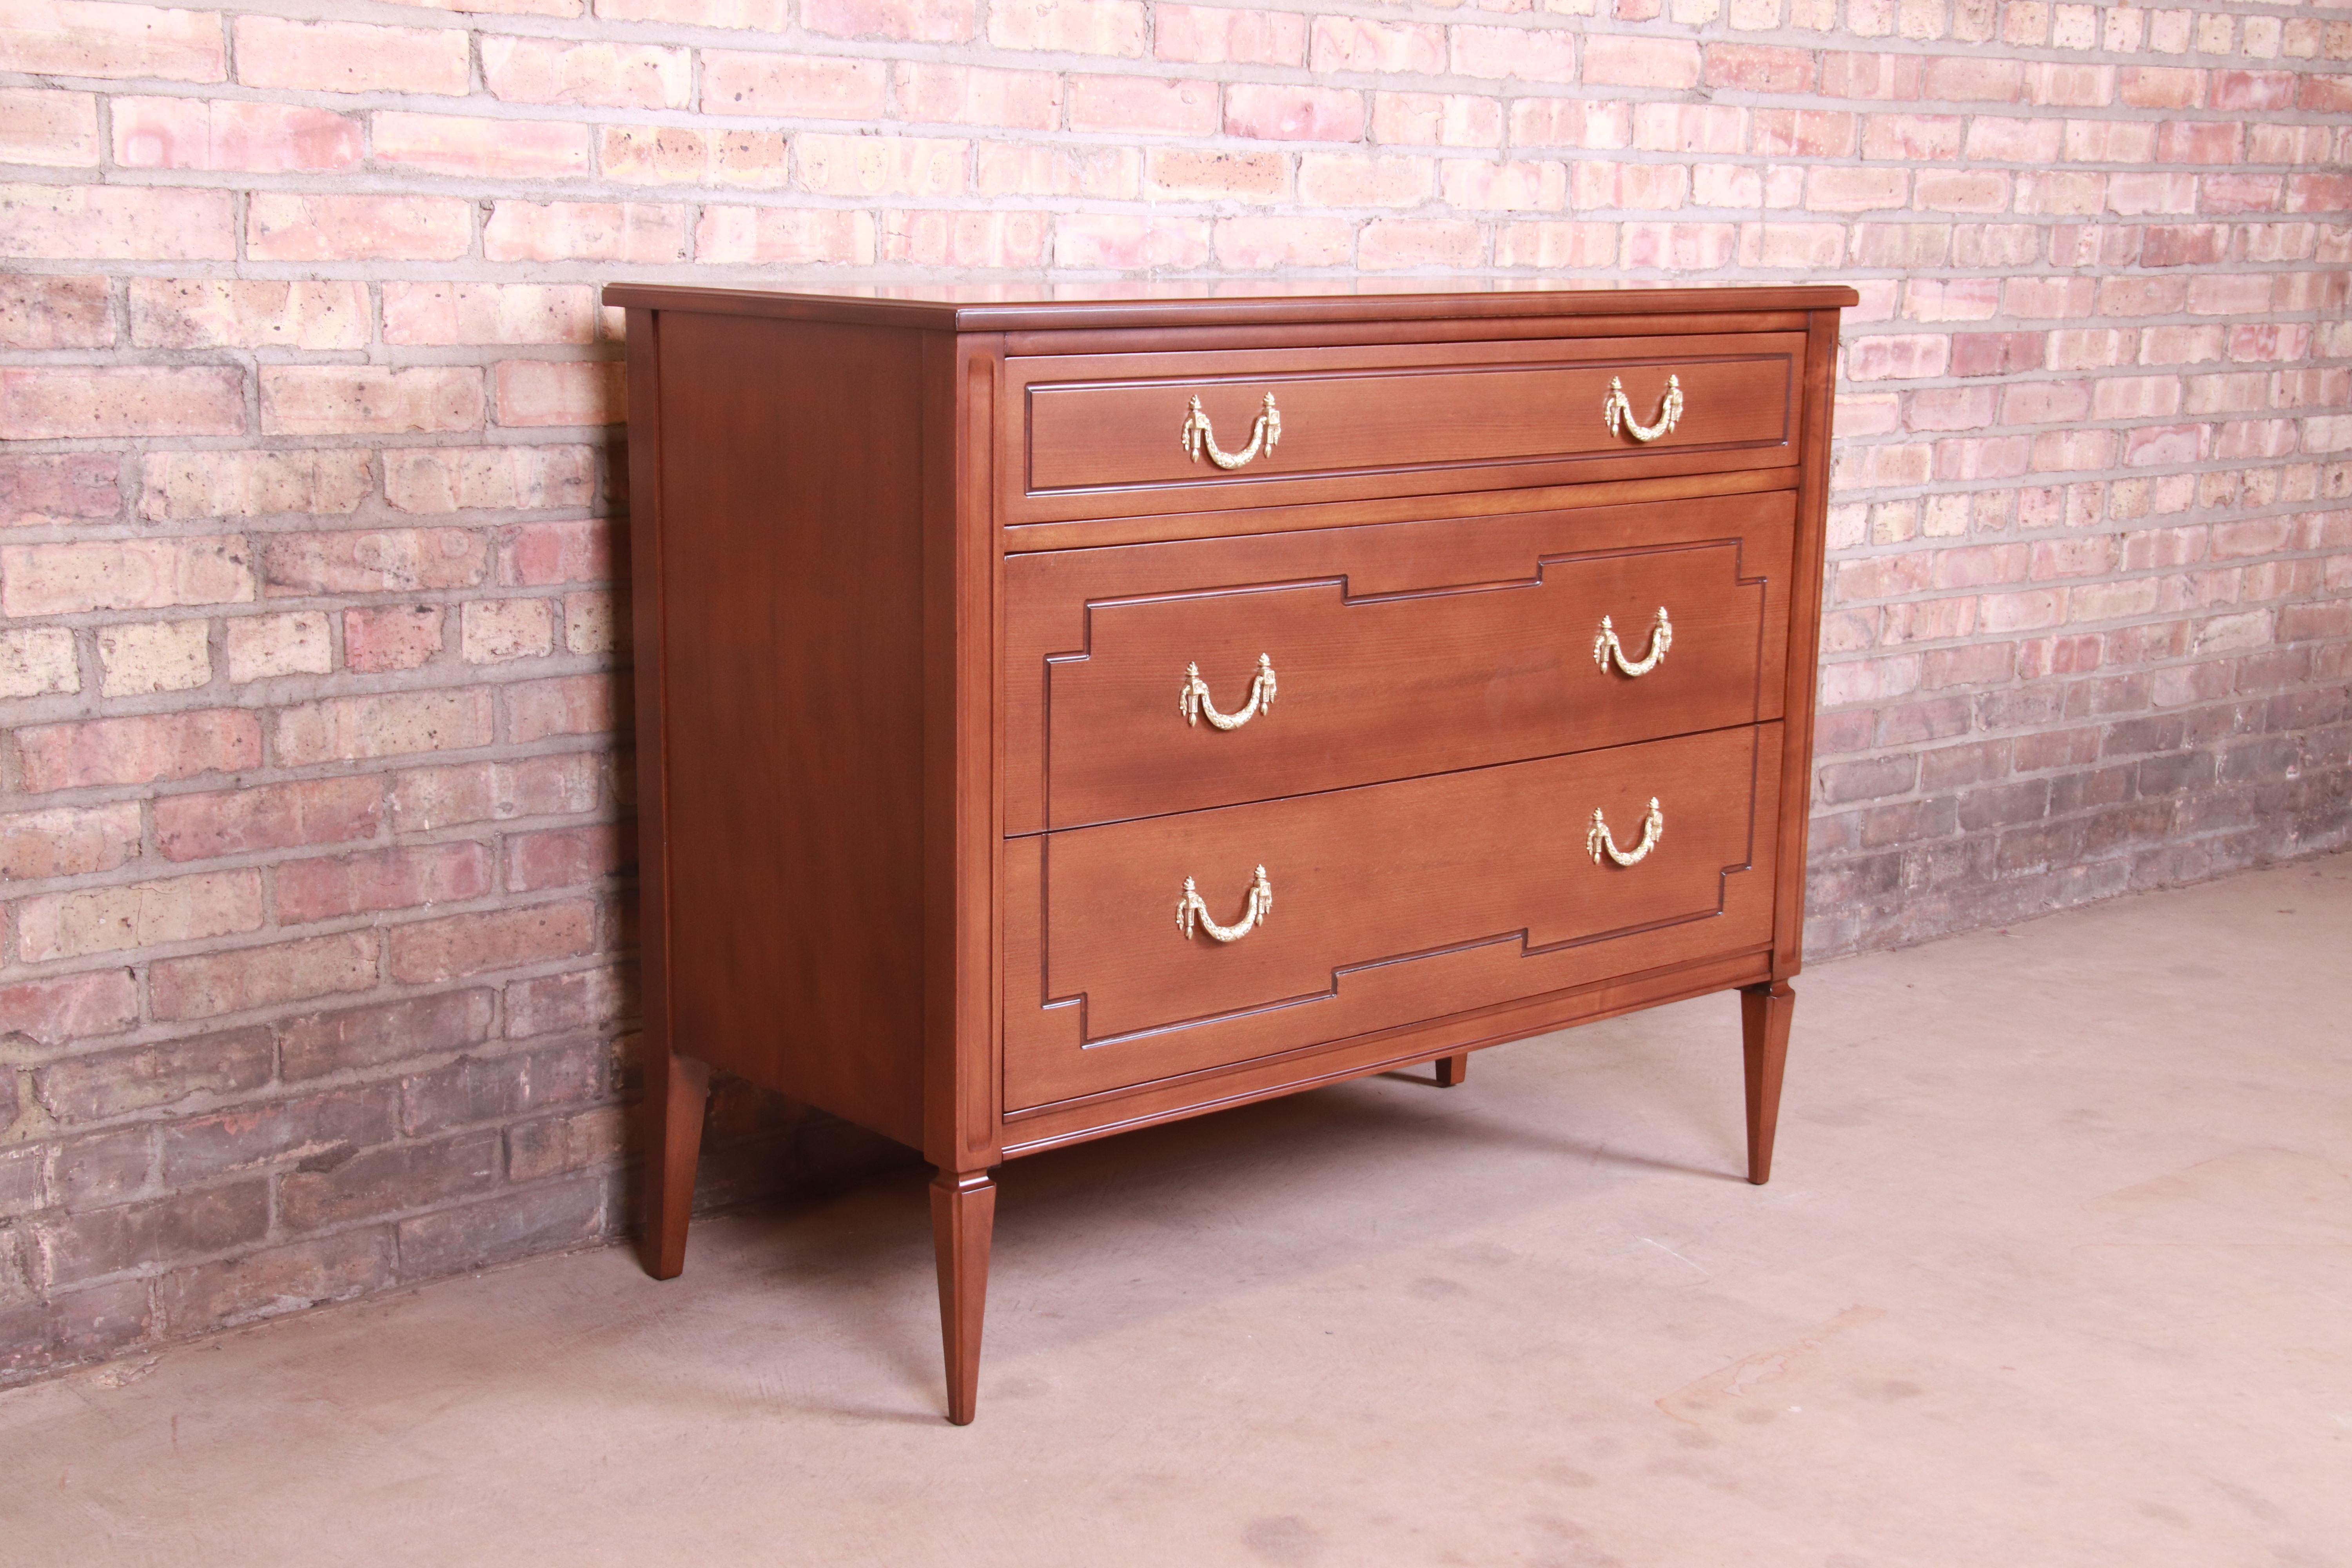 Early 20th Century Early Baker Furniture French Regency Chest of Drawers, Newly Refinished